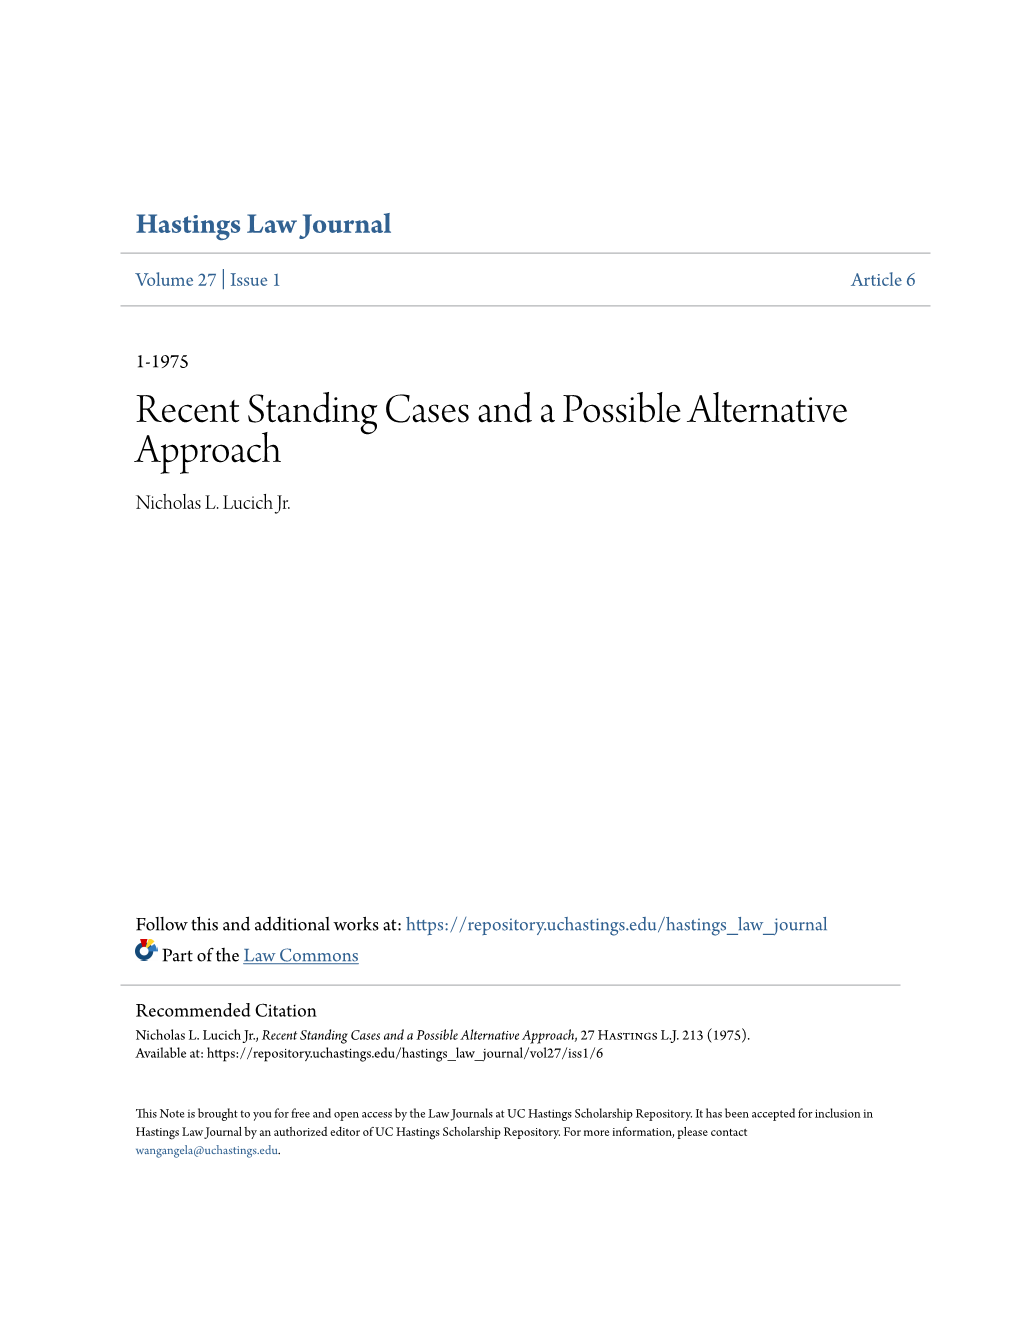 Recent Standing Cases and a Possible Alternative Approach Nicholas L